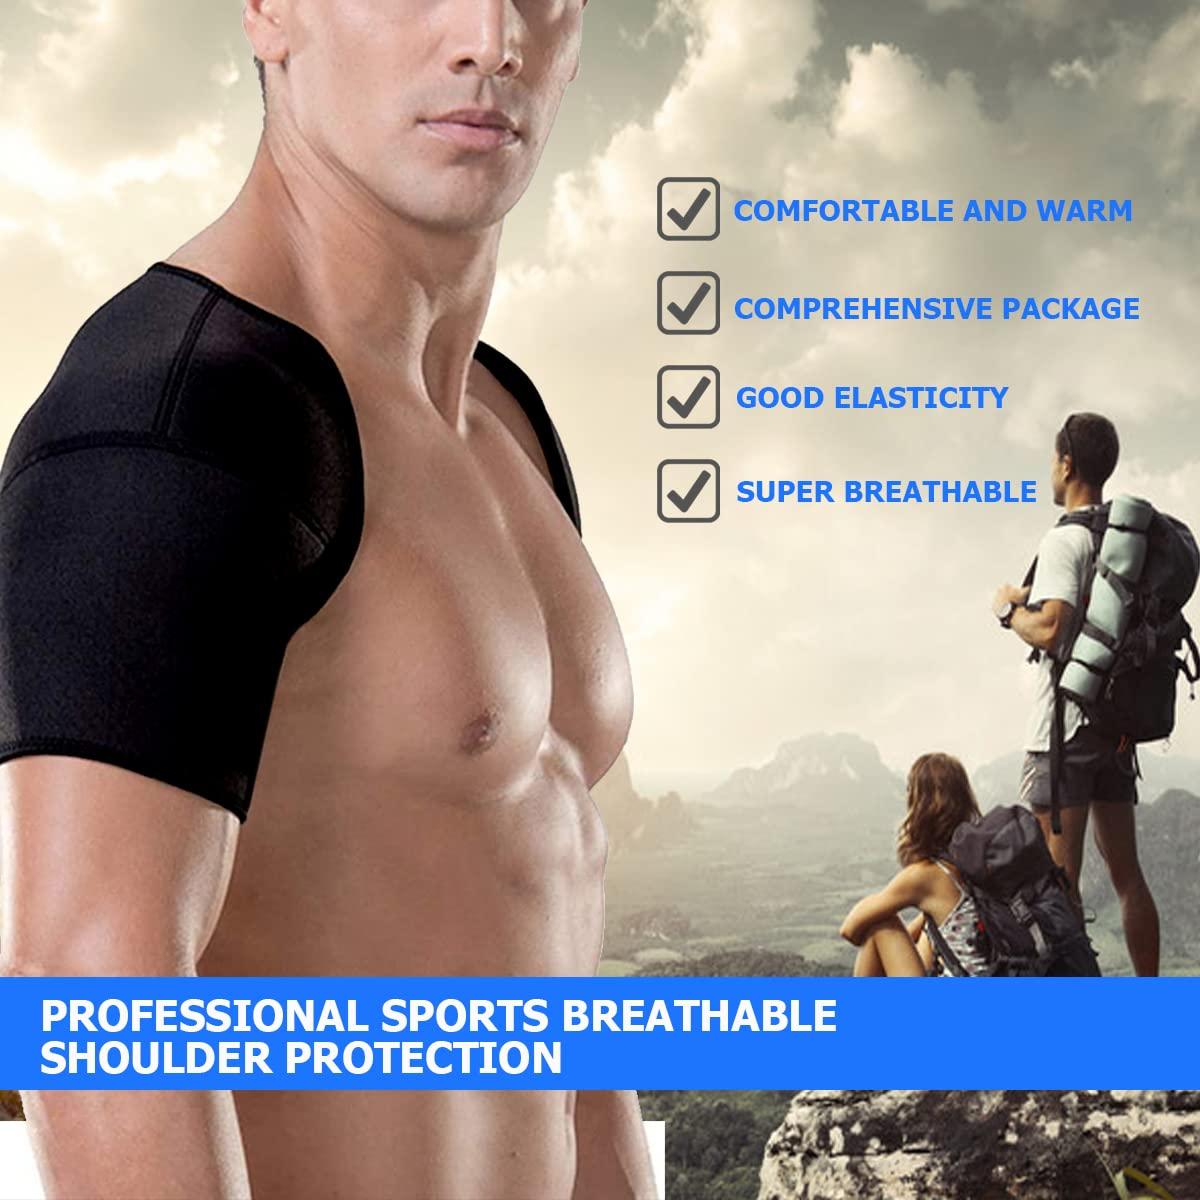 FERCAISH Double Shoulder Brace Warm Support Protector Shoulder Strap Brace  for Sleeping Outdoor Lifting Sports, Relieve Chronic Tendinitis Pain, Breathable  Sports Protective Gear (Size XL) X-Large